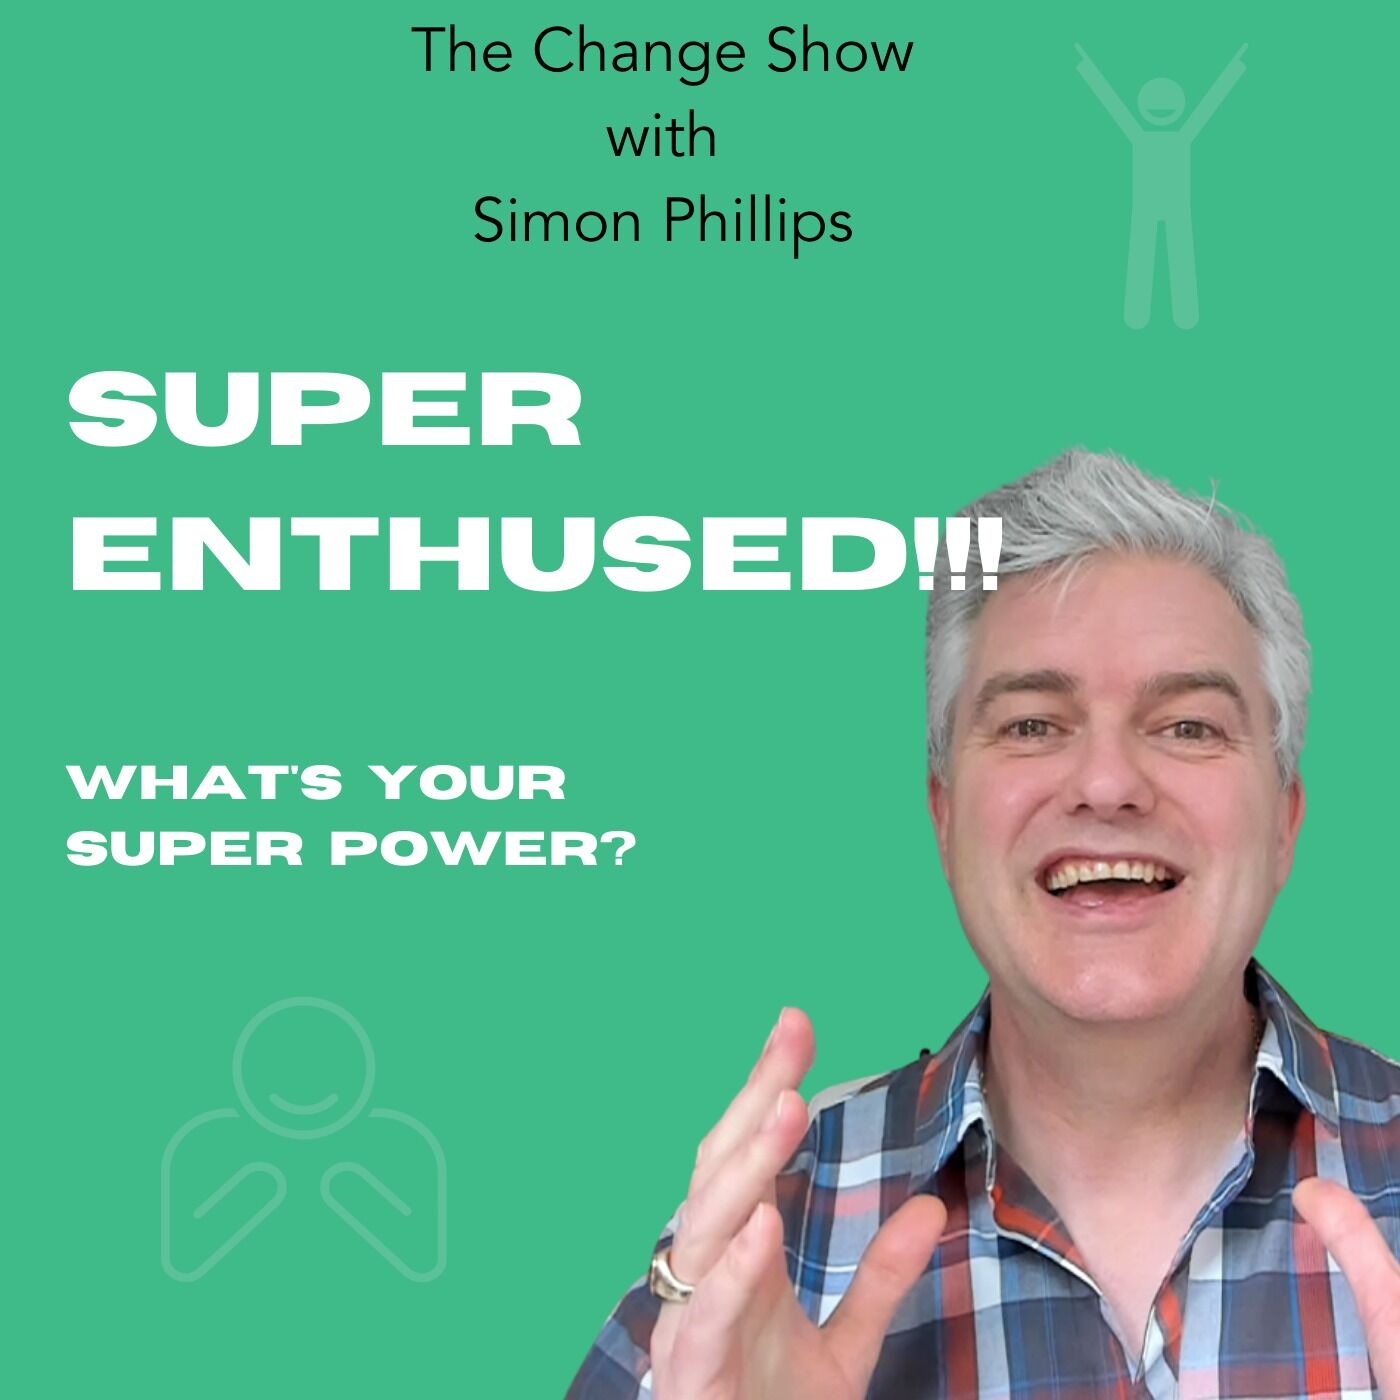 Super Enthused - What's Your Super Power?